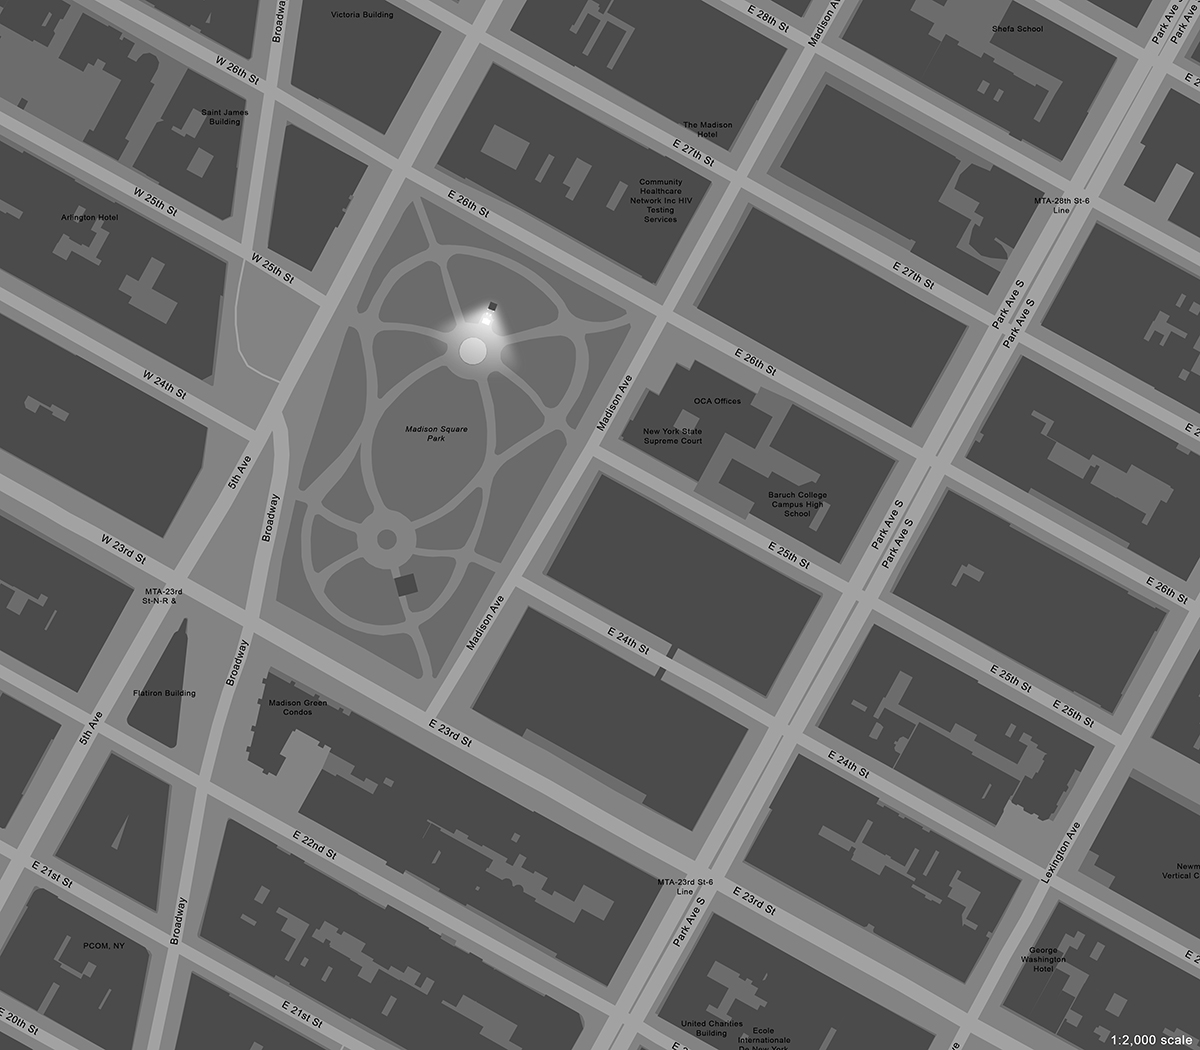 Aerial map of a section of Manhattan showing Madison Square Park, with a grid of streets and avenues on all sides. In the northern center of Madison Square Park there is a highlighted point showing the location of the Admiral Farragut monument.